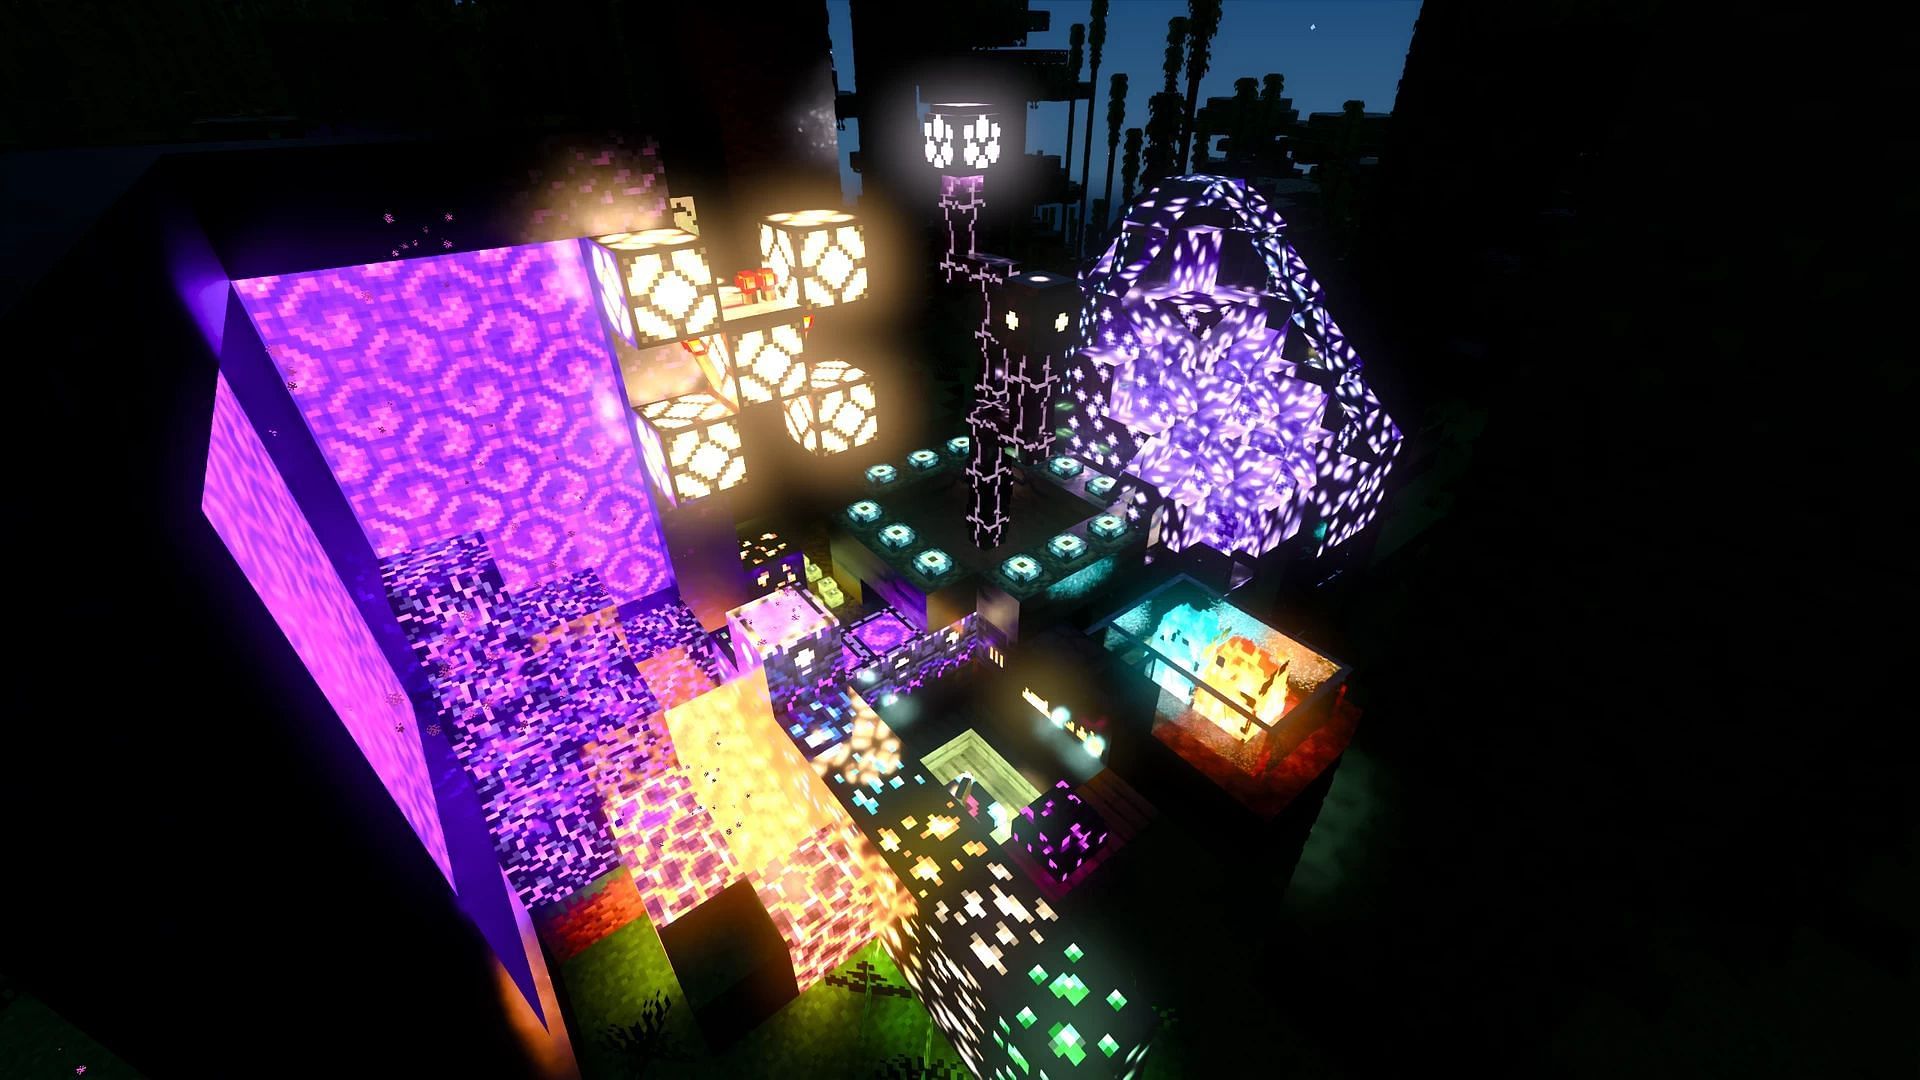 Radiant RTX provides a very dynamic lighting experience (Image via Planet Minecraft user Lioncat6)